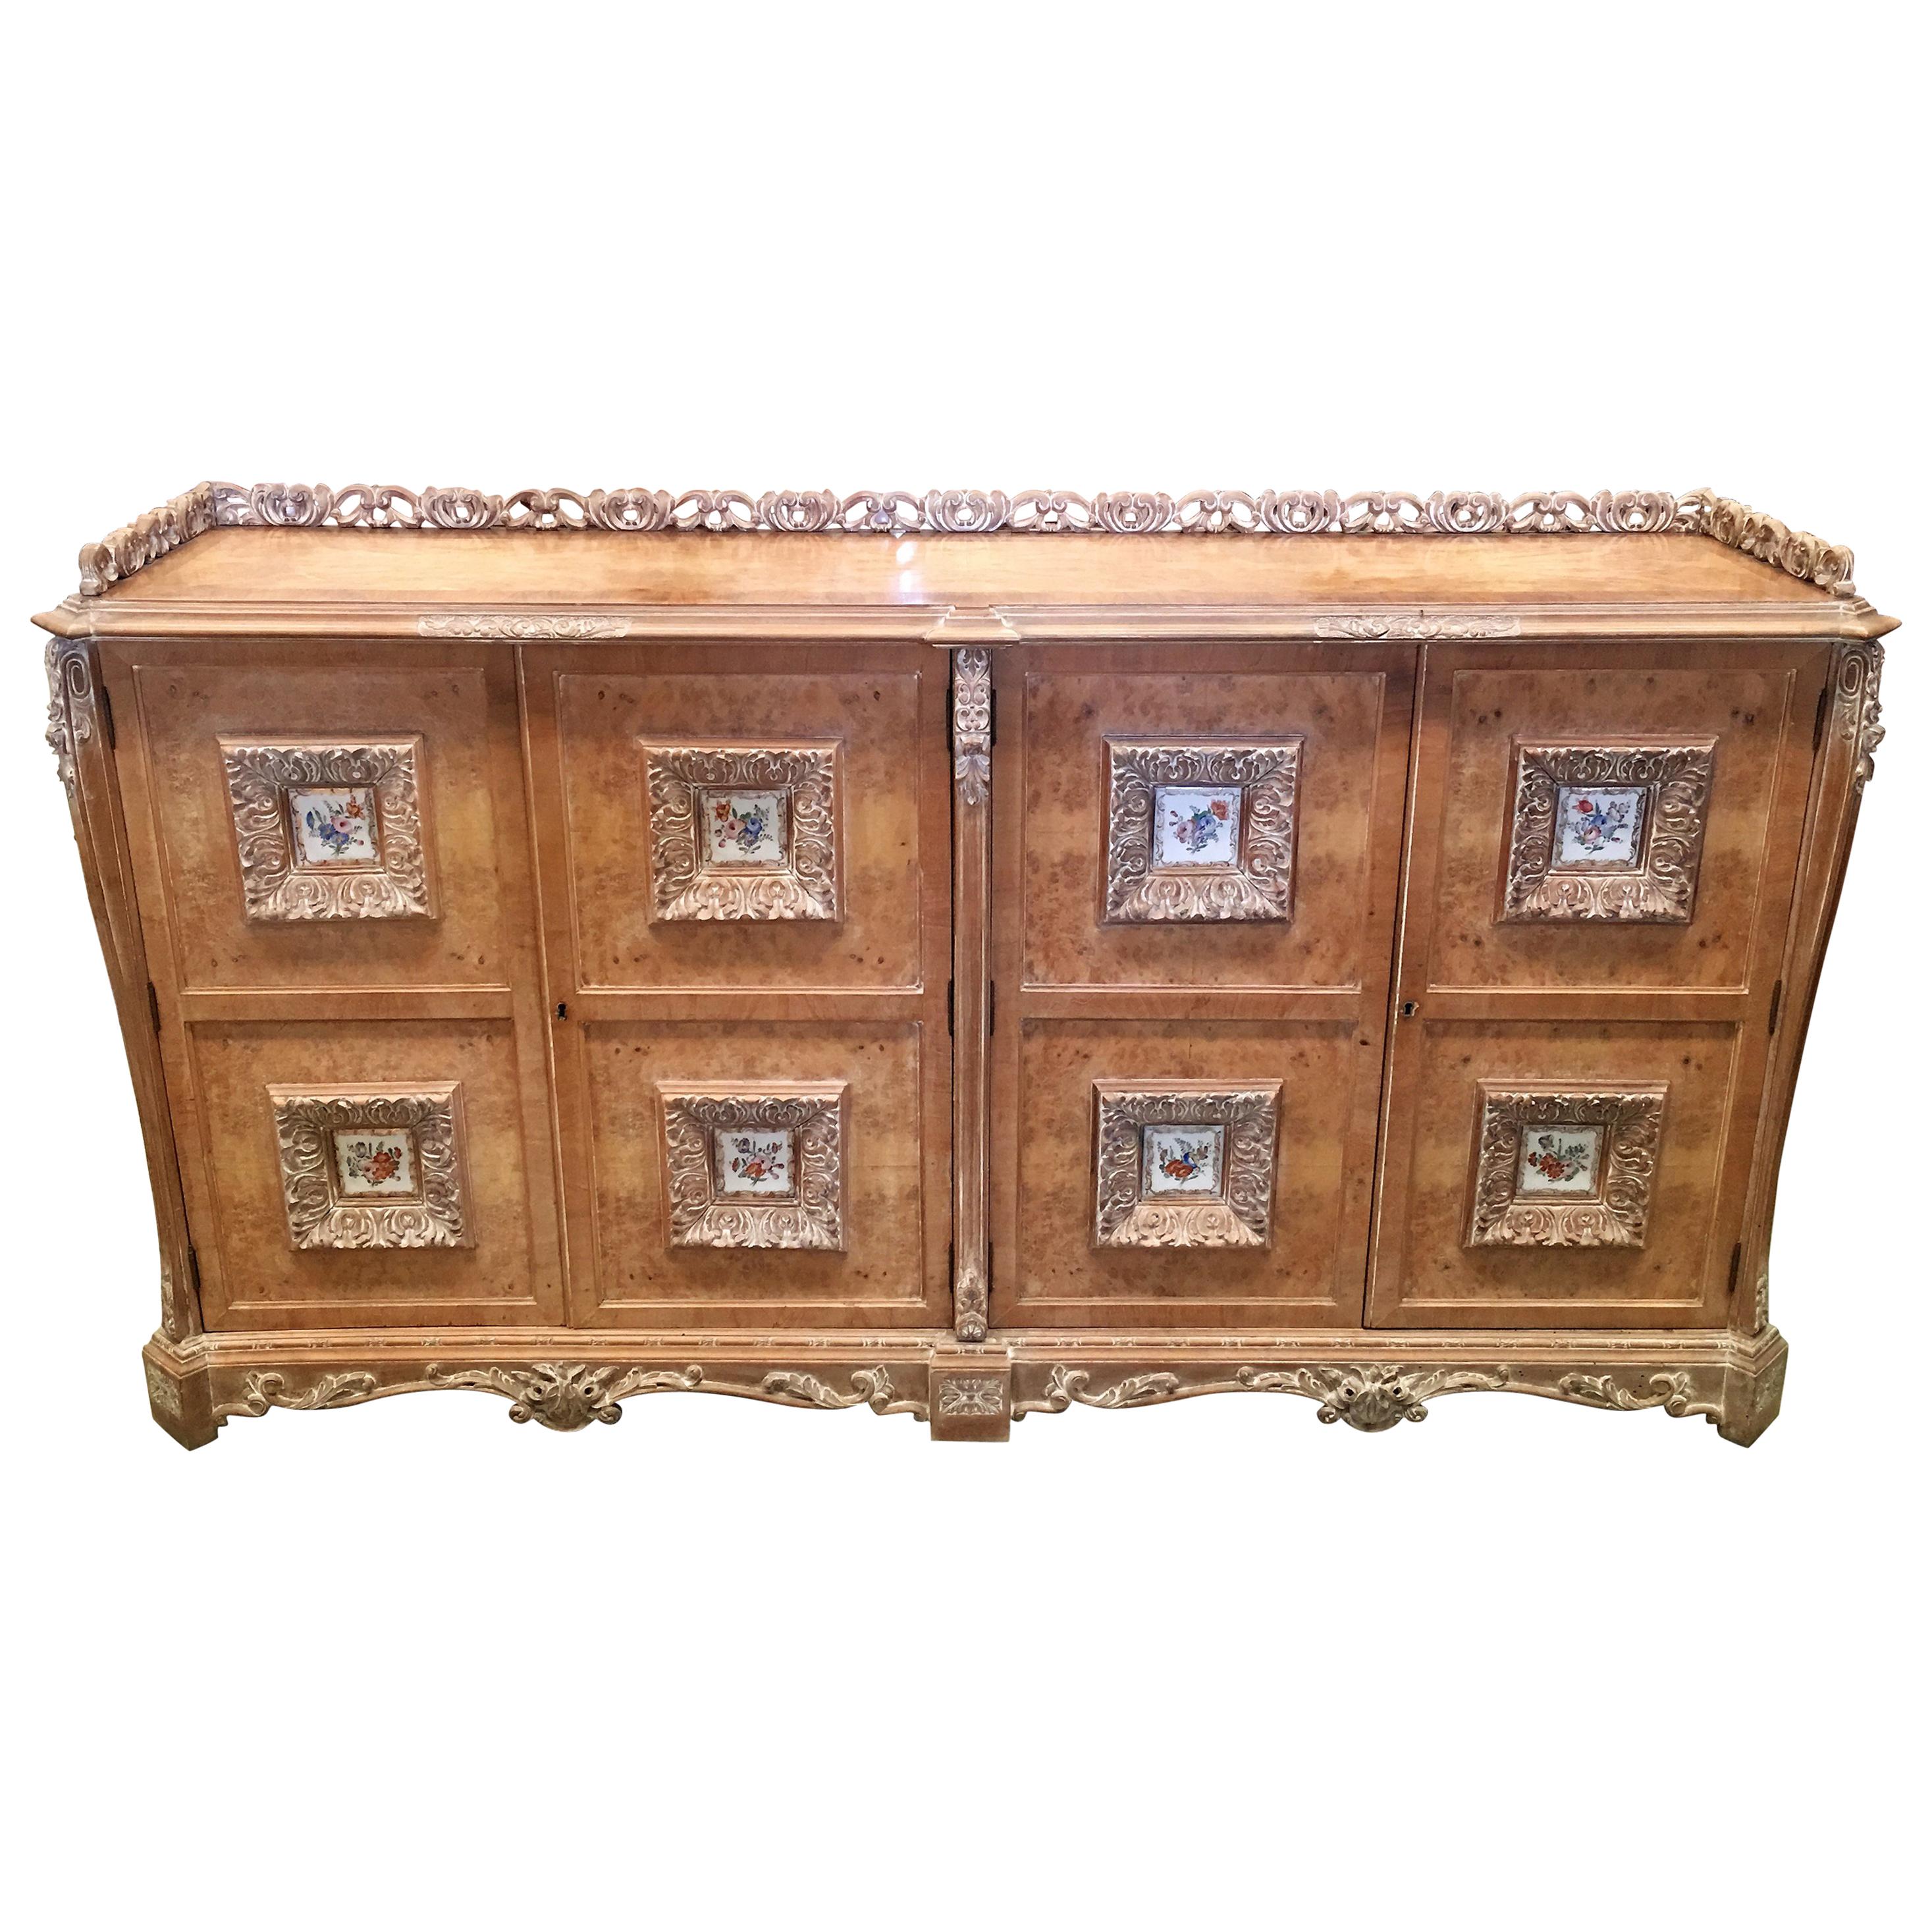 Spanish Mid-20th Carved Sideboard with Four Decorated Ceramic Panels in Doors